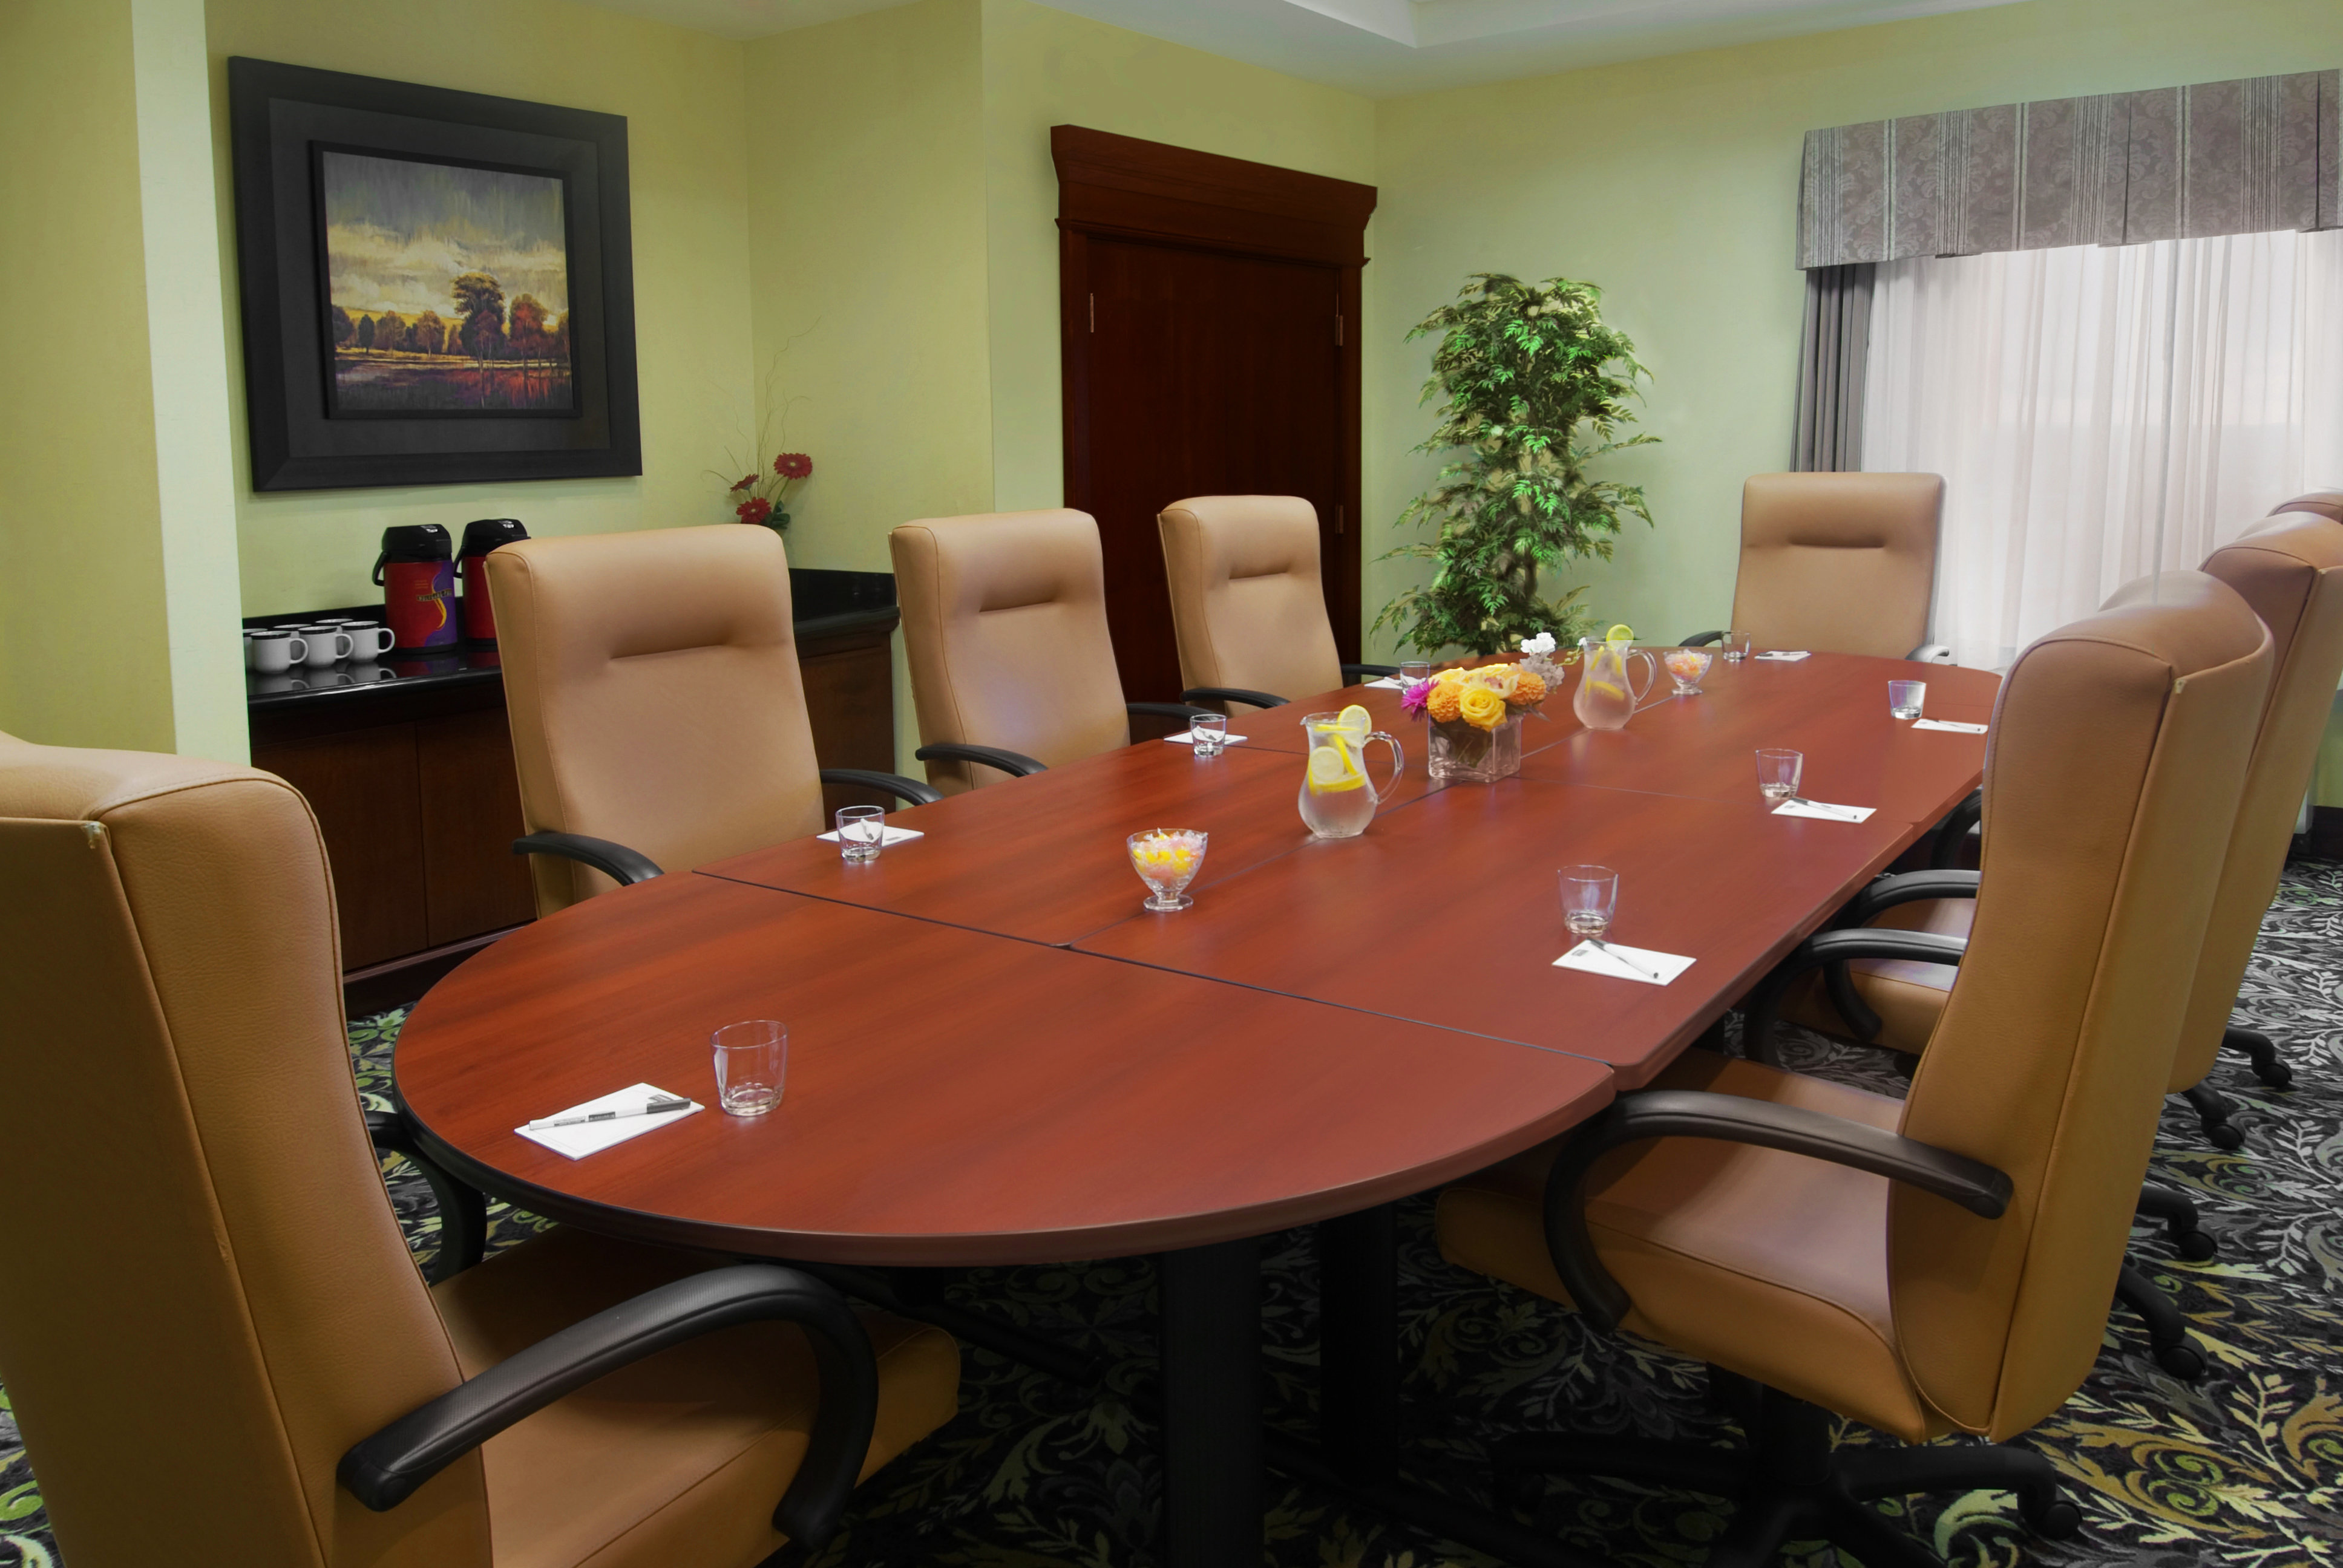 Let us assist you with your meeting needs